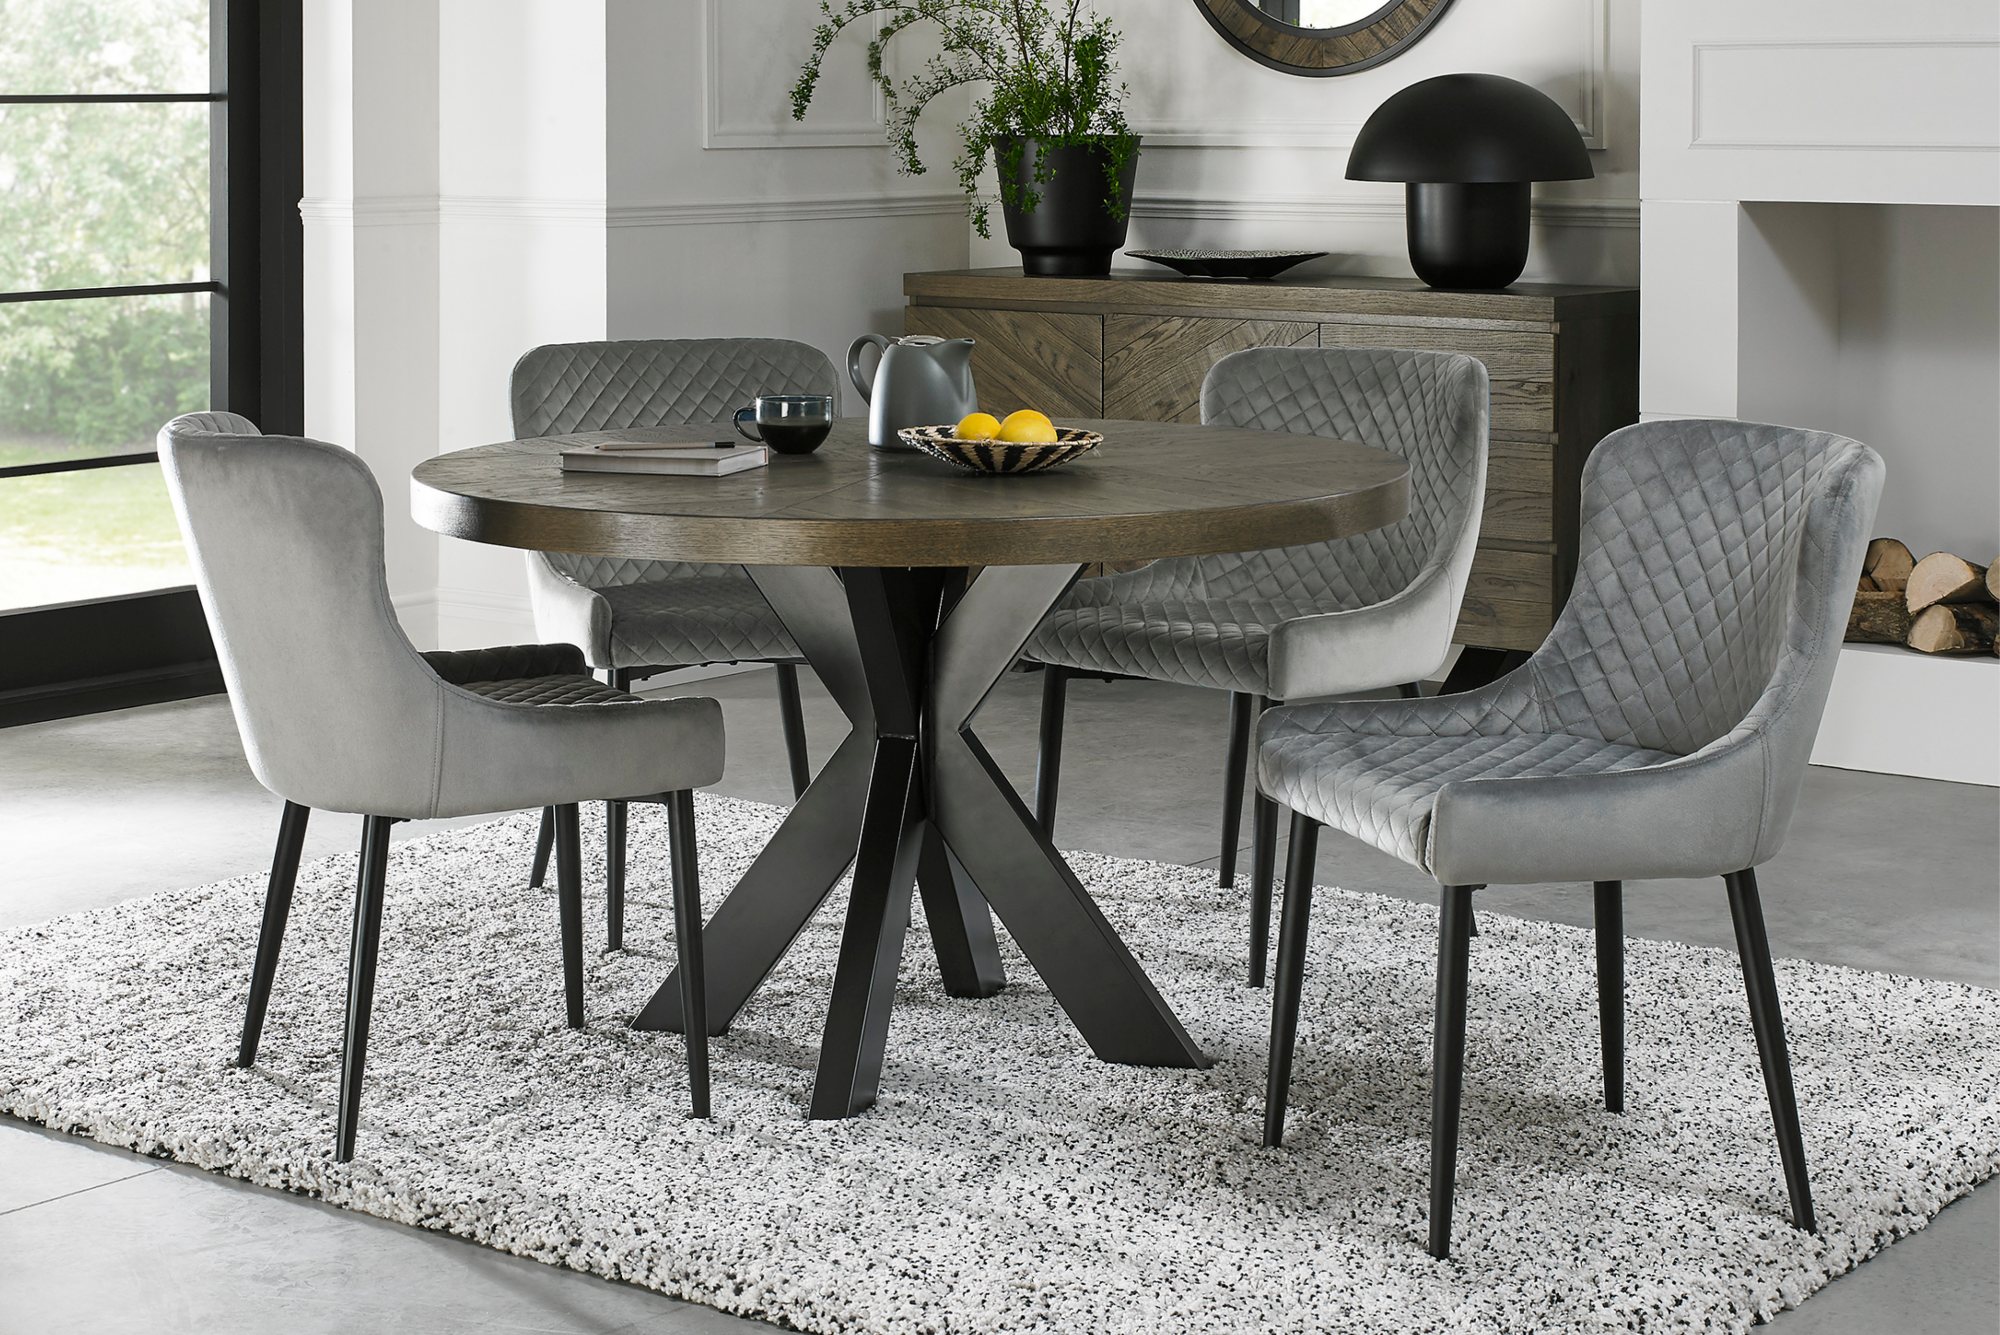 Home Origins Bosco fumed oak 4 seater dining table with 4 Cezanne chairs- grey velvet fabric